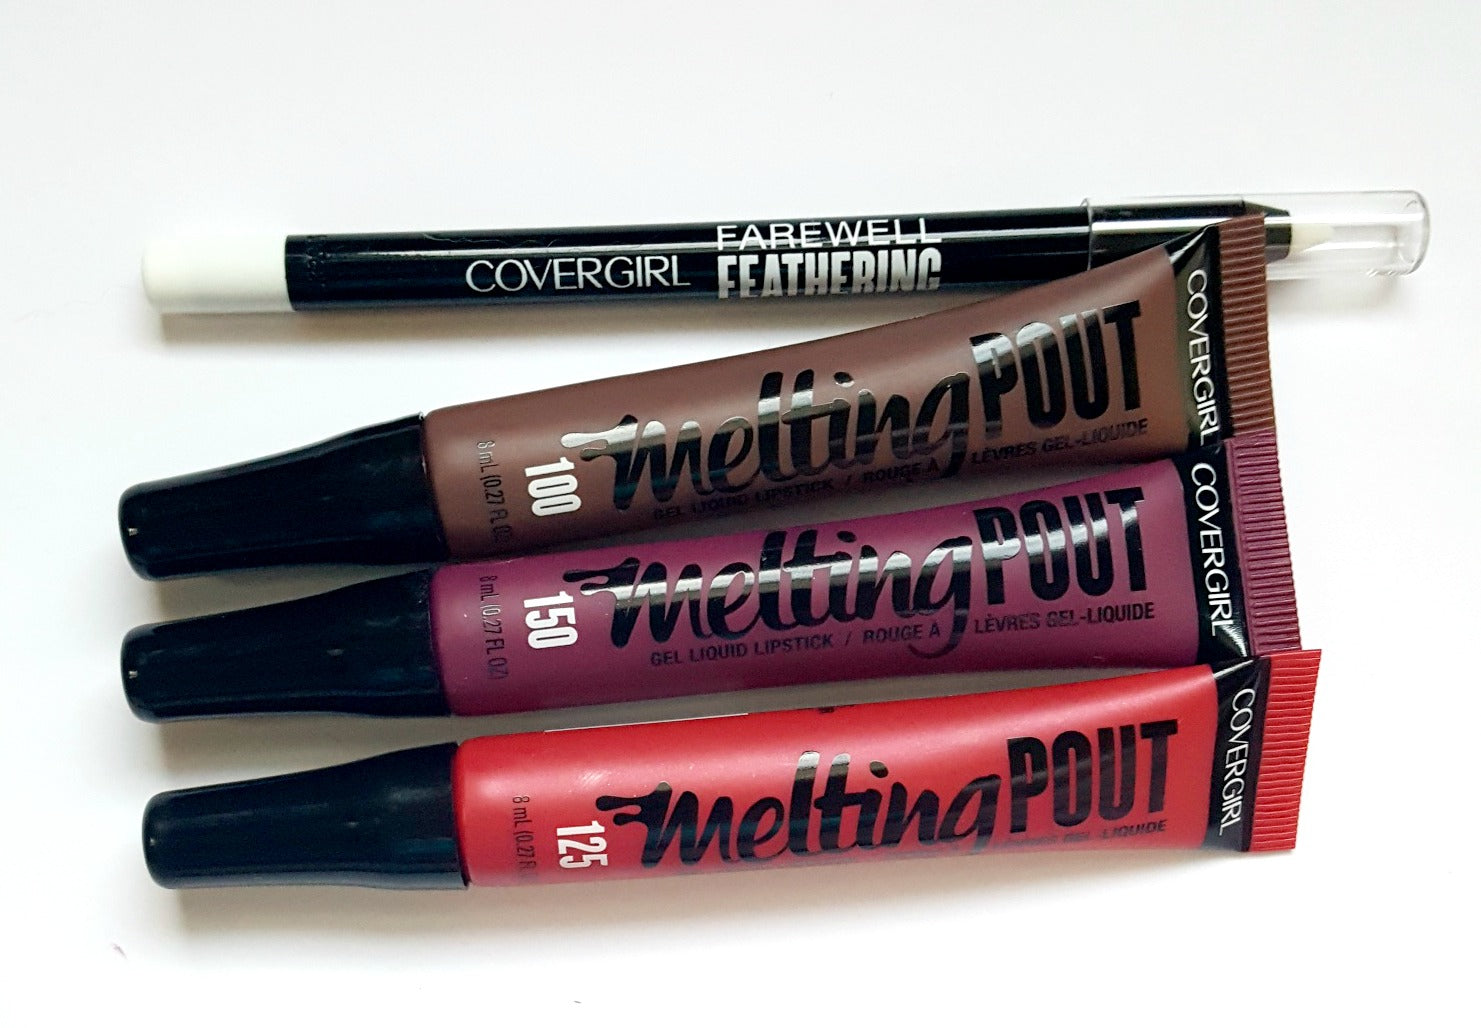 Review, Photos, Swatches, Makeup Trend 2017, 2018: Cover Girl Melting Pout Liquid Lipsticks, Farewell Feathering Lip Liner, Gell Yes, Raspberry Gelly, Gelebrity